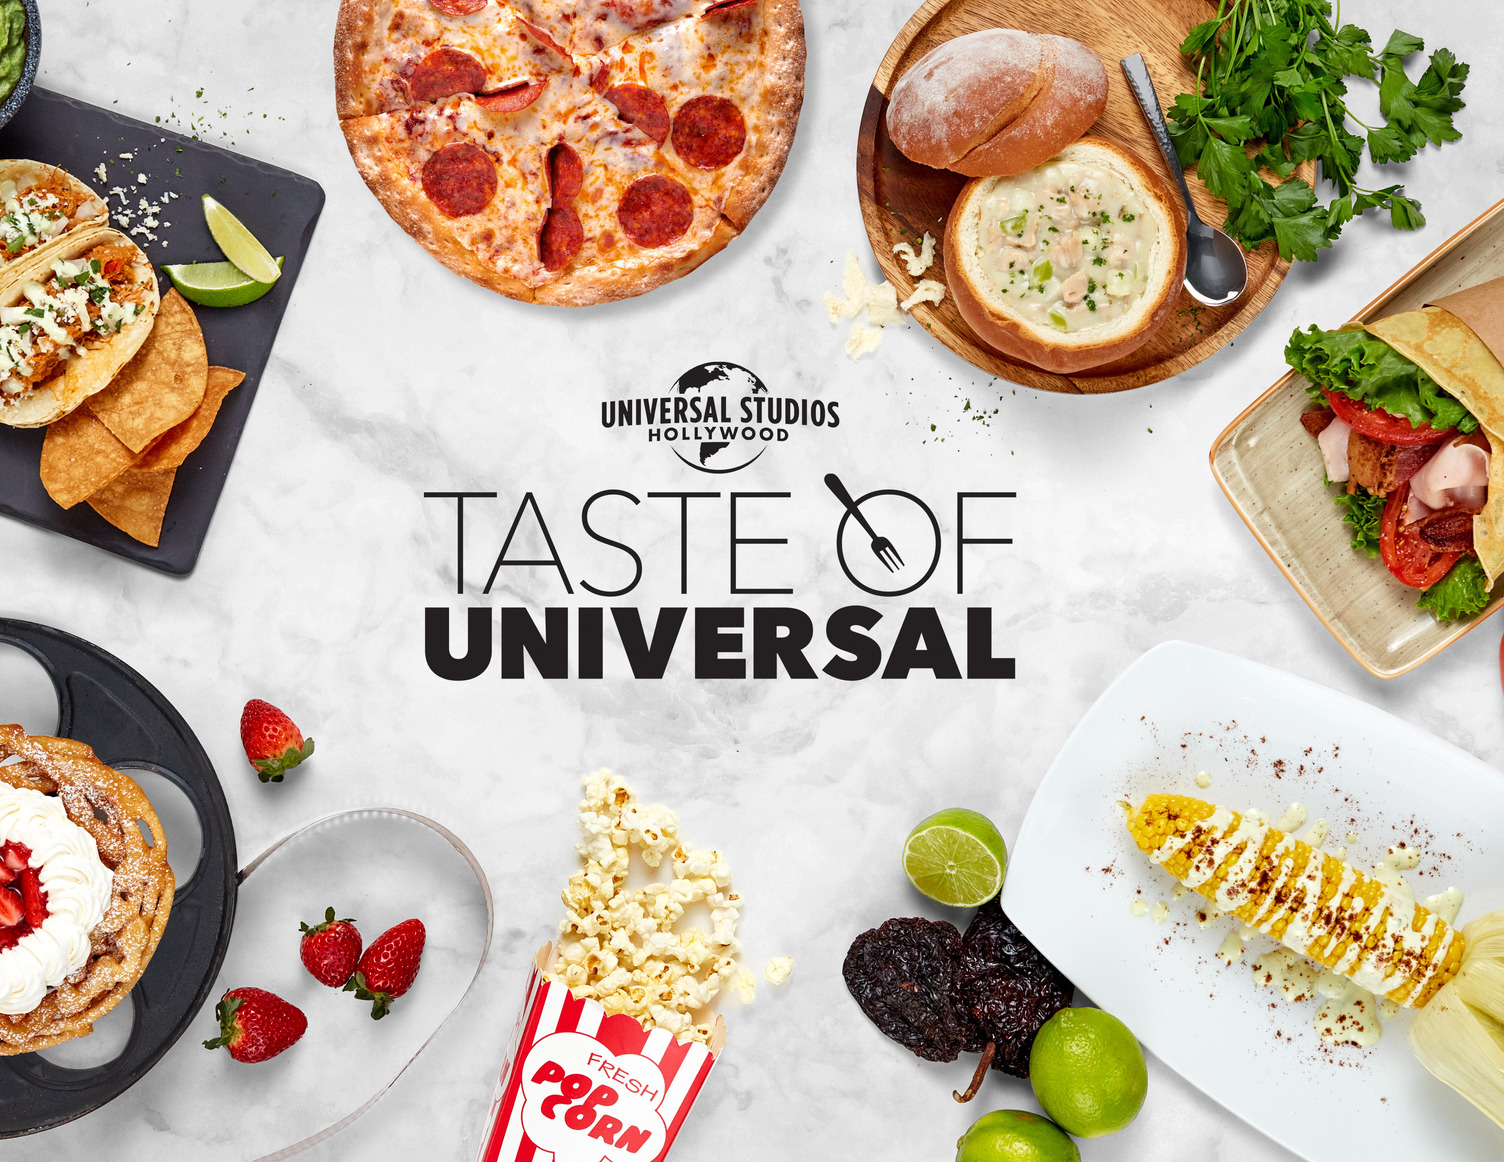 “Taste of Universal” food festival event announced for Universal